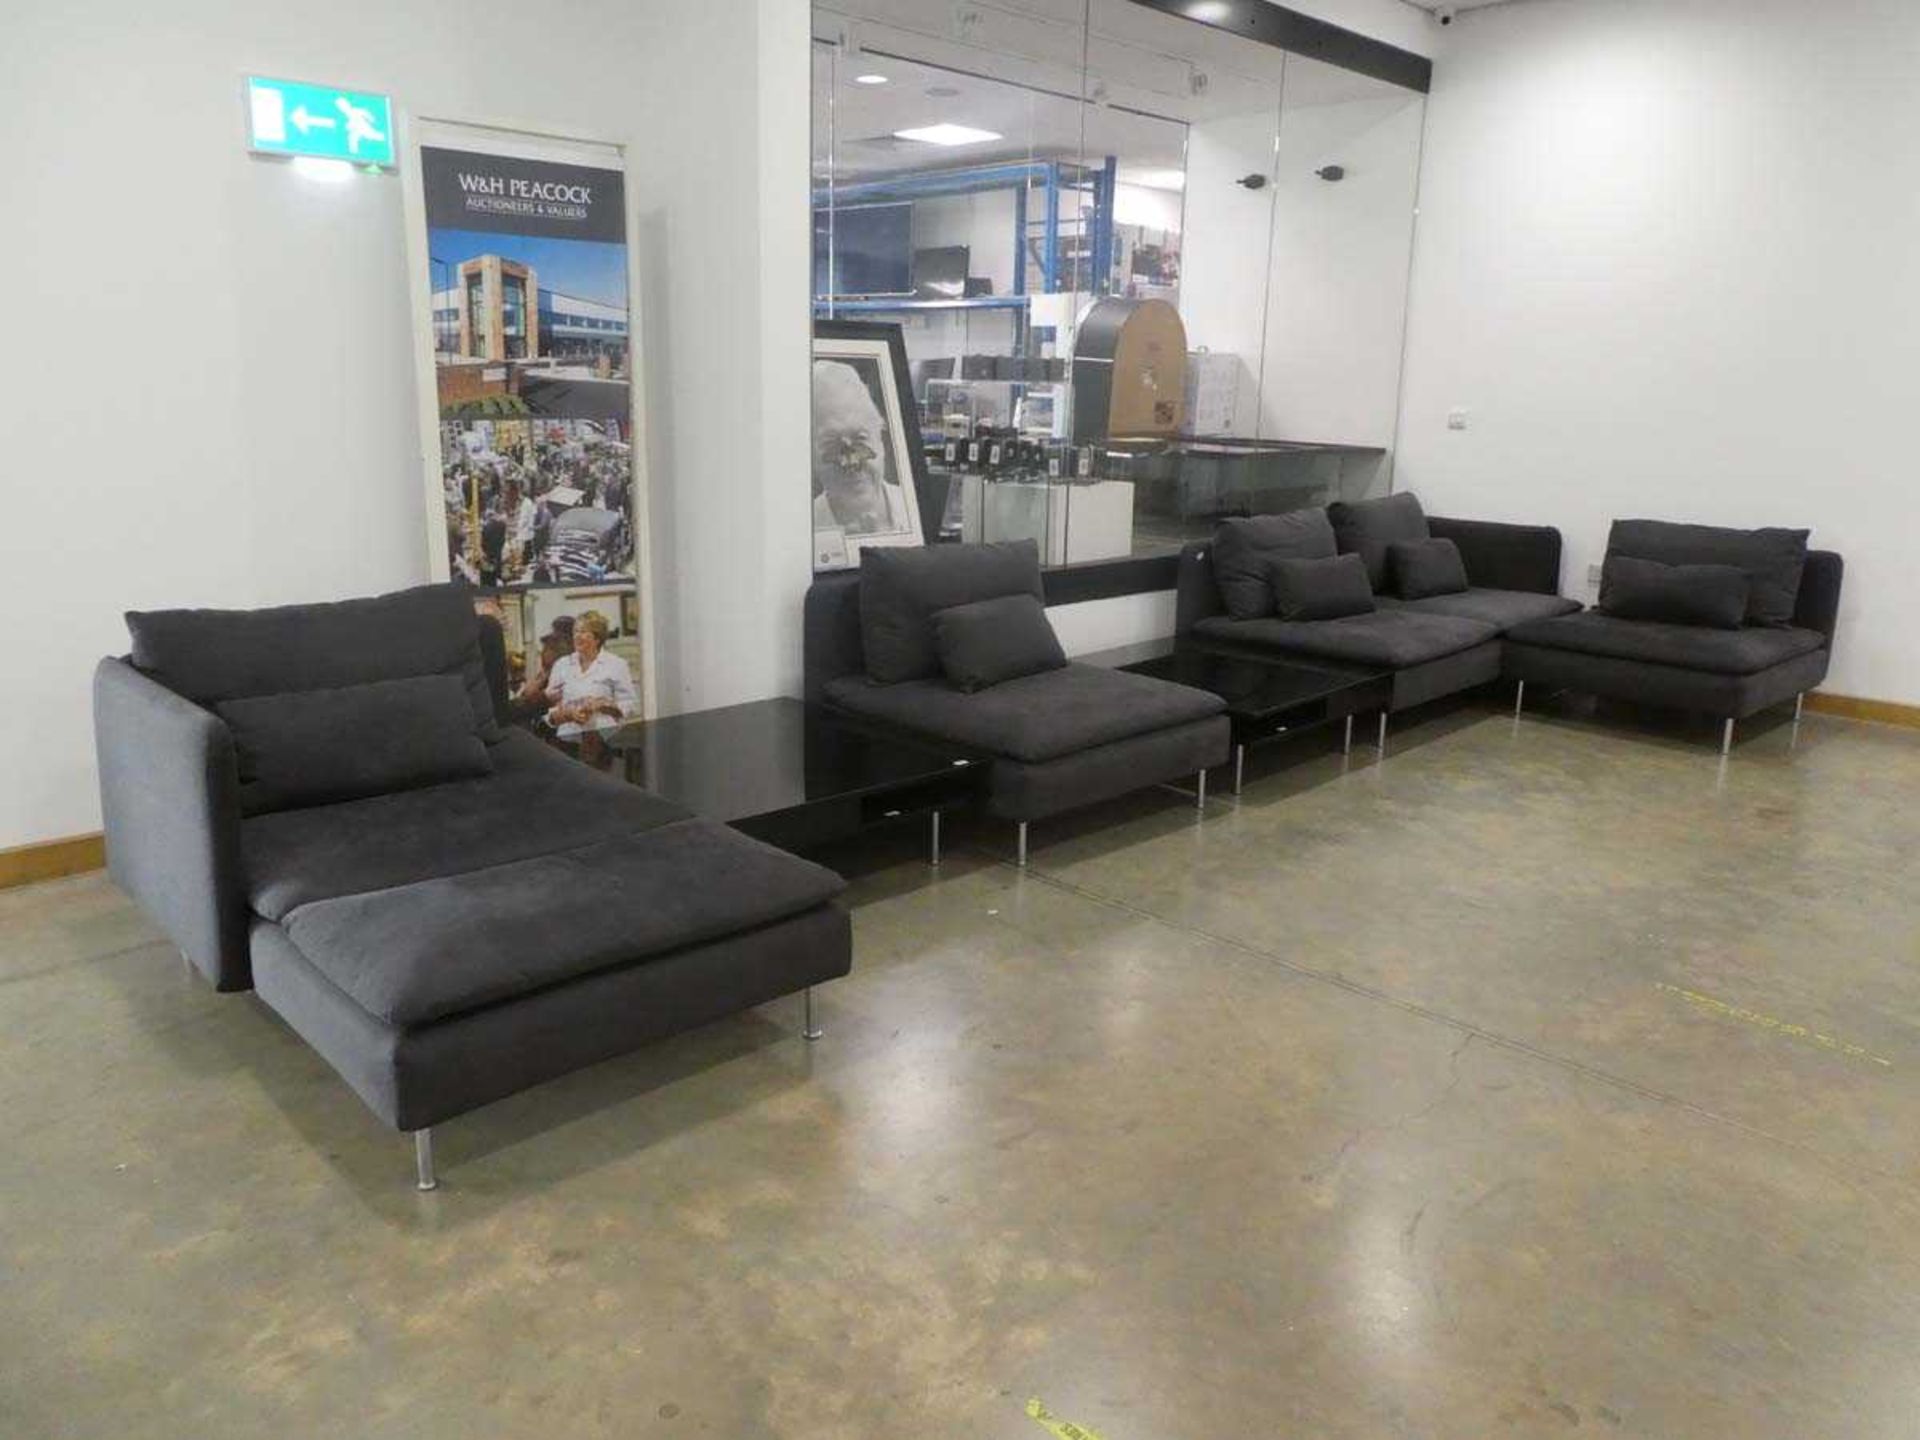 Grey fabric modular sofa in 4 sections plus a pair of high glass coffee tables